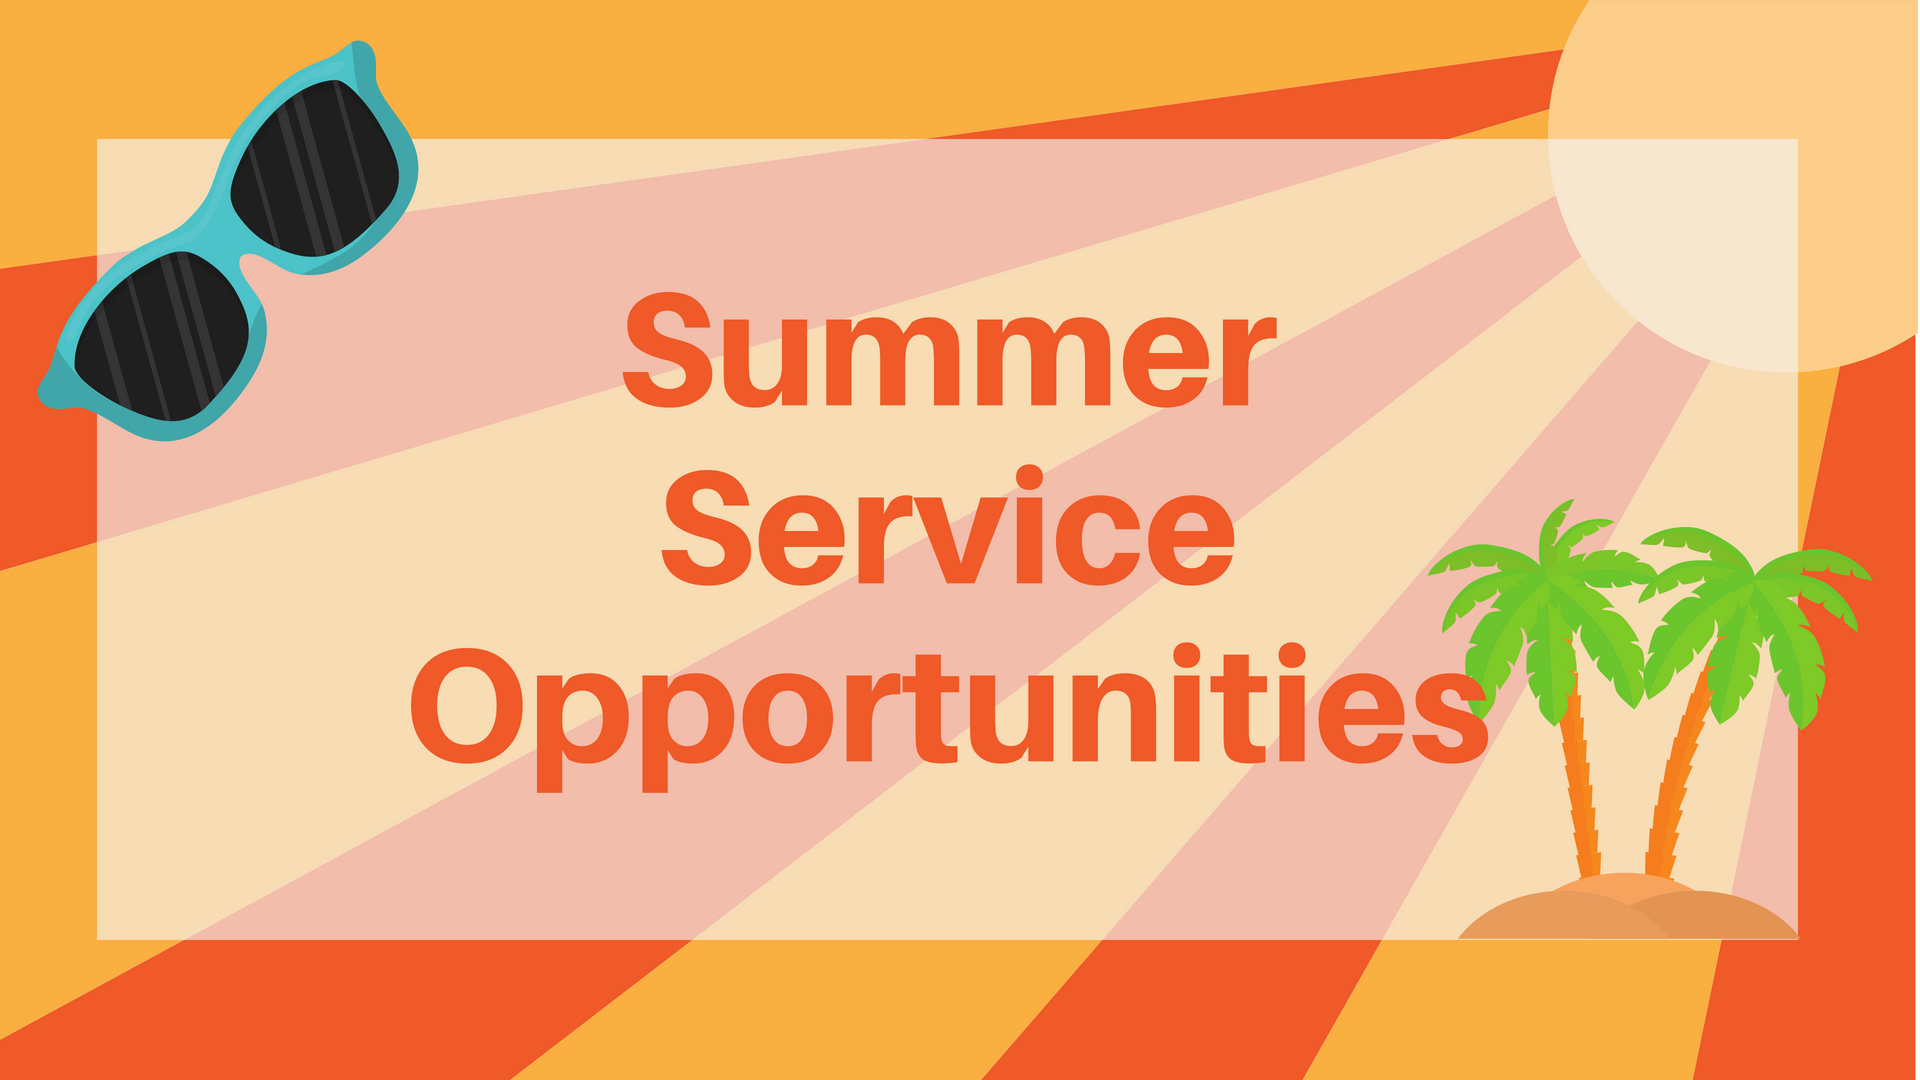 5-service-opportunities-to-do-this-summer